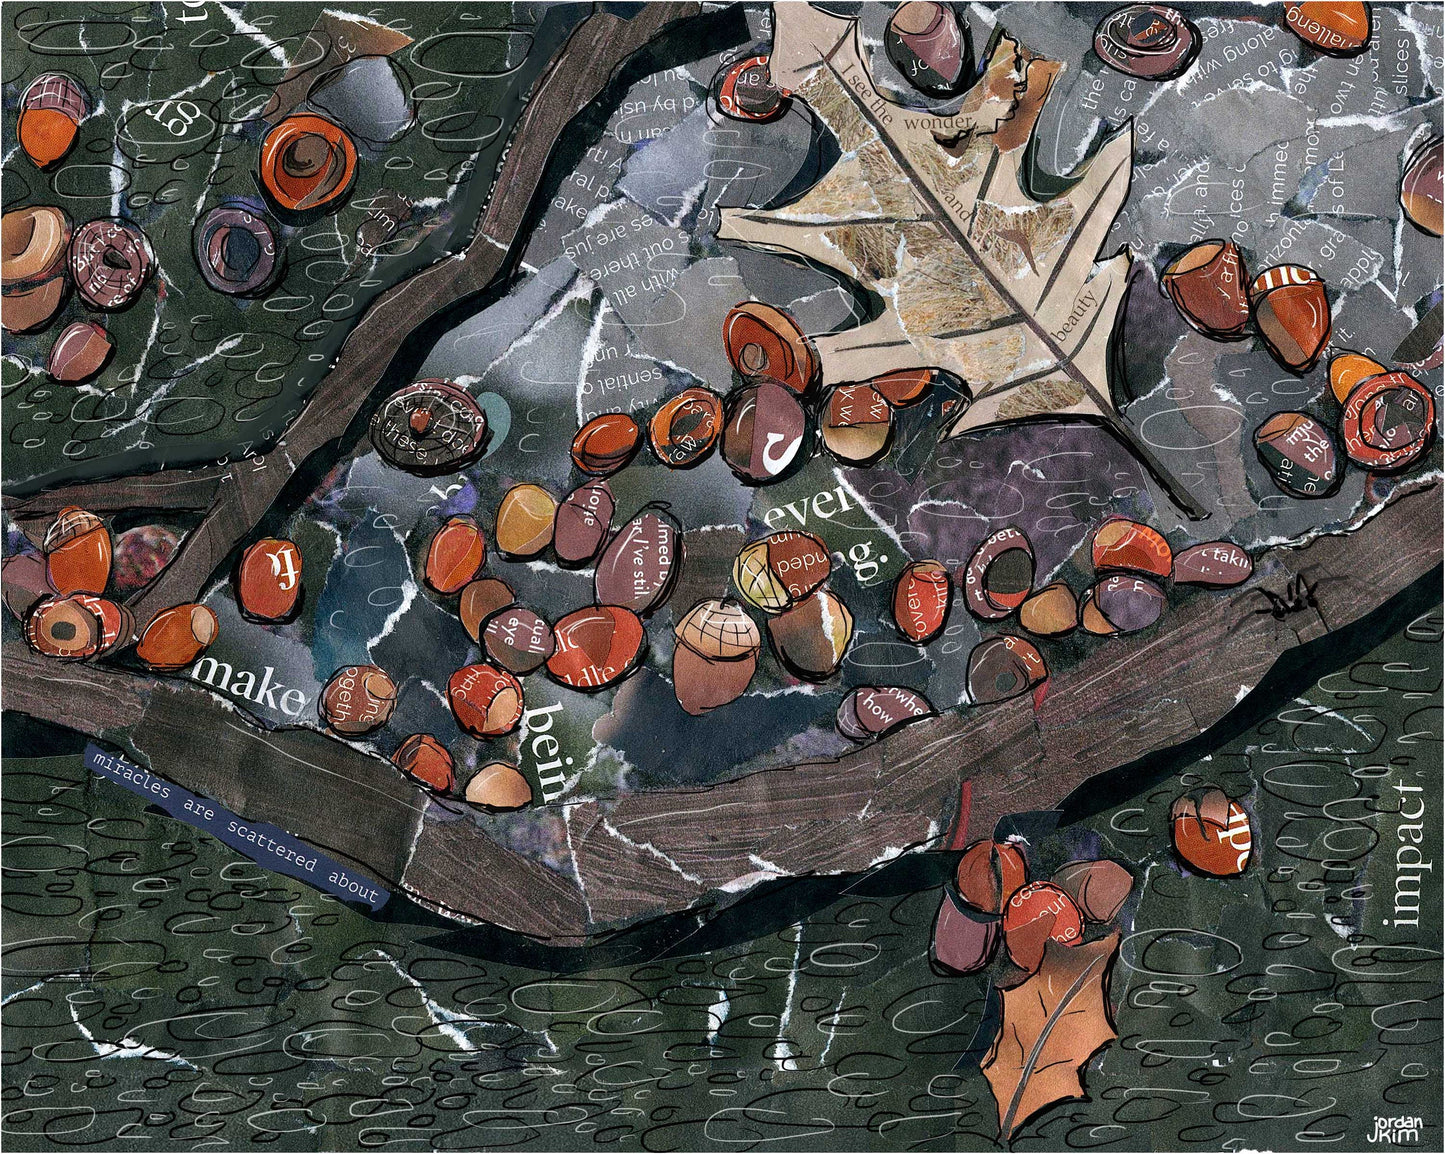 Greeting Card of a mixed media collage of acorns among burned tree roots, spider, fall, autumn, leaves- Blank inside